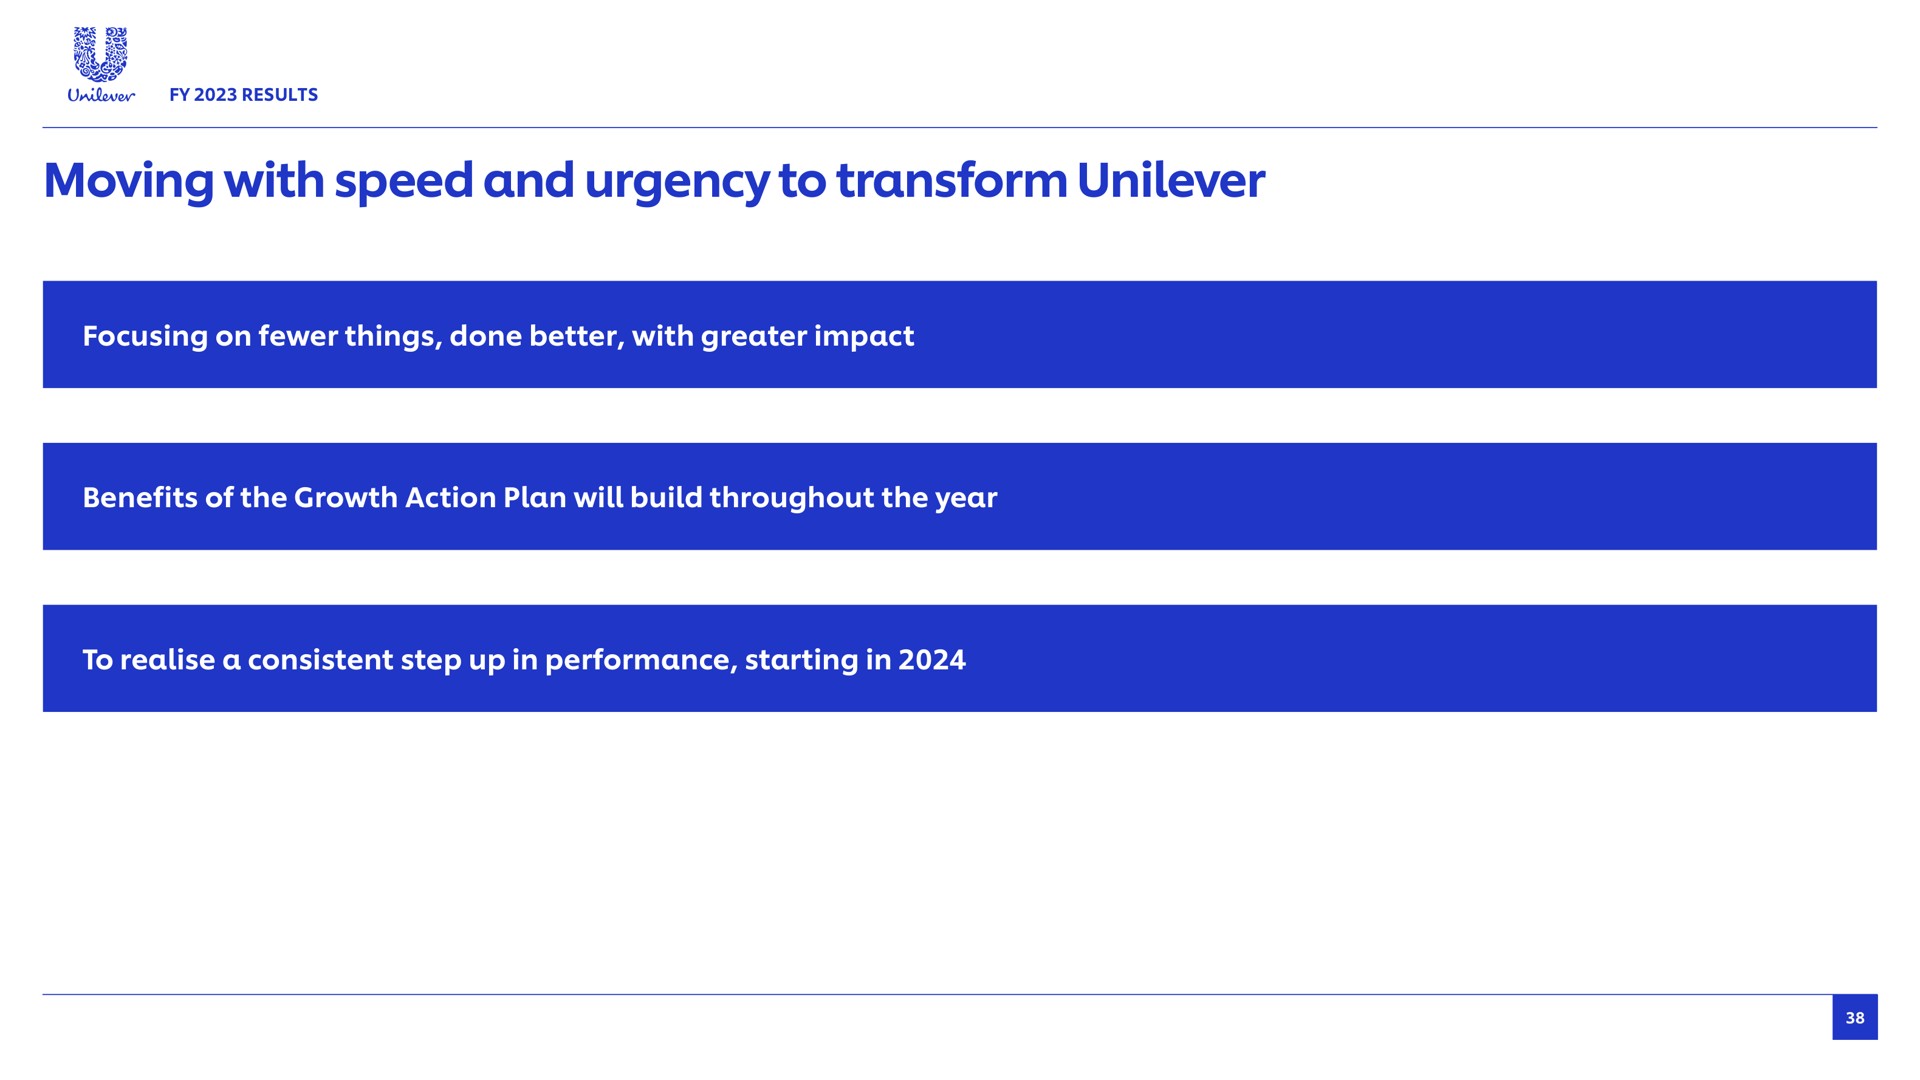 moving with speed and urgency to transform focusing on things done better greater impact benefits of the growth action plan will build throughout the year a consistent step up in performance starting in | Unilever